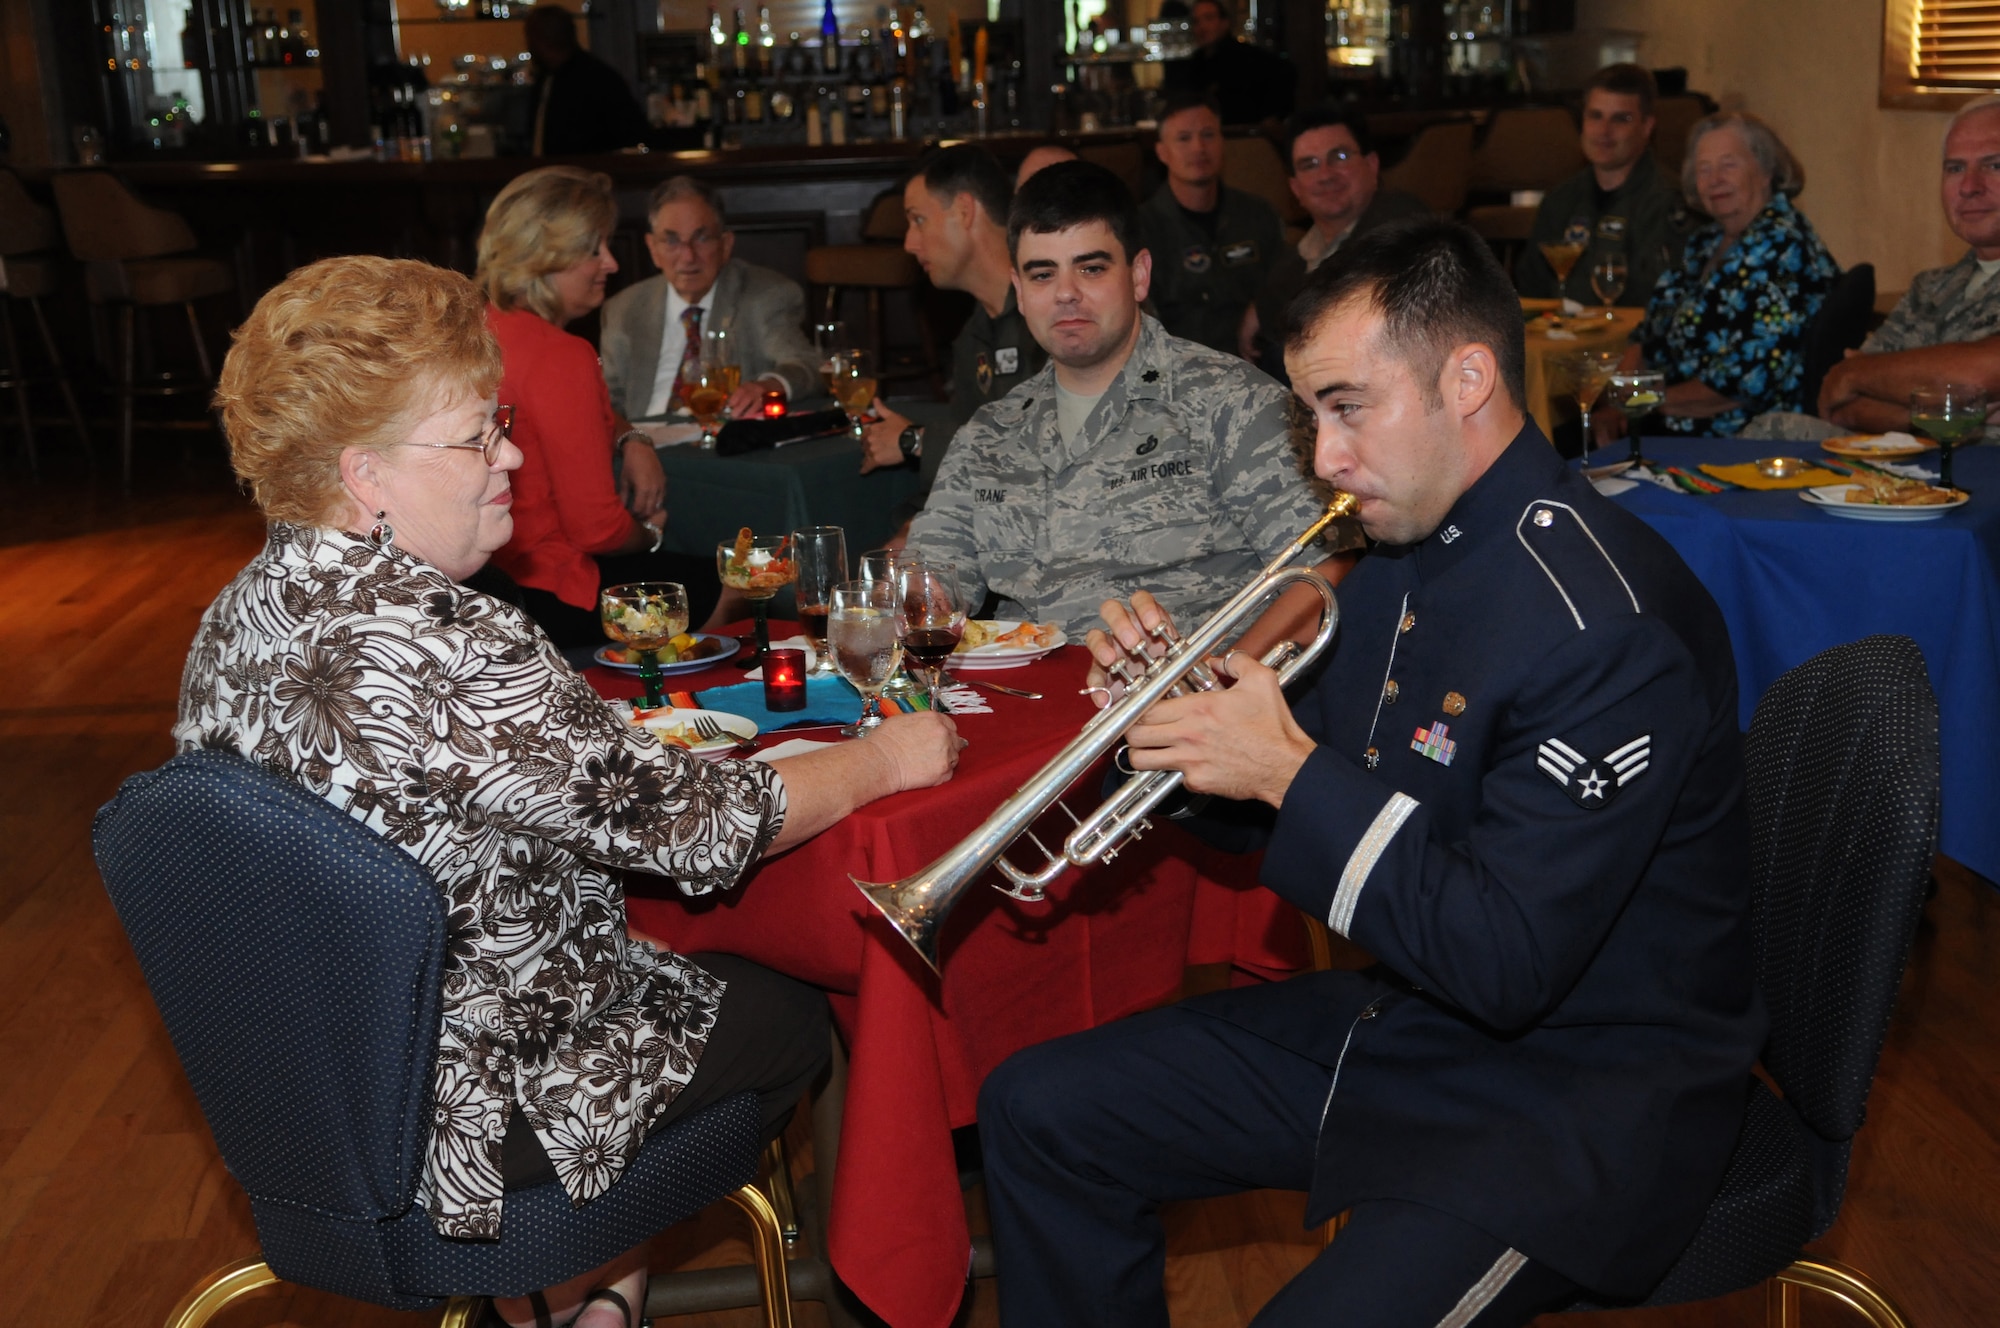 Senior Airman David Evans, a trumpet apprentice with the Gateway Band, performs a solo for one of Randolph's newest Honorary Commanders, Ms. Leslye Baumann, as Lt. Col. Christopher Crane, 12th Comptroller Squadron, looks on.  The Honorary Commanders Program enhances the positive relationship between Randolph Air Force Base and the surrounding communities. The reception was held 10 Sept, at the Randolph Air Force Base Parr Club. (U.S. Air Force photo/Melissa Peterson)
